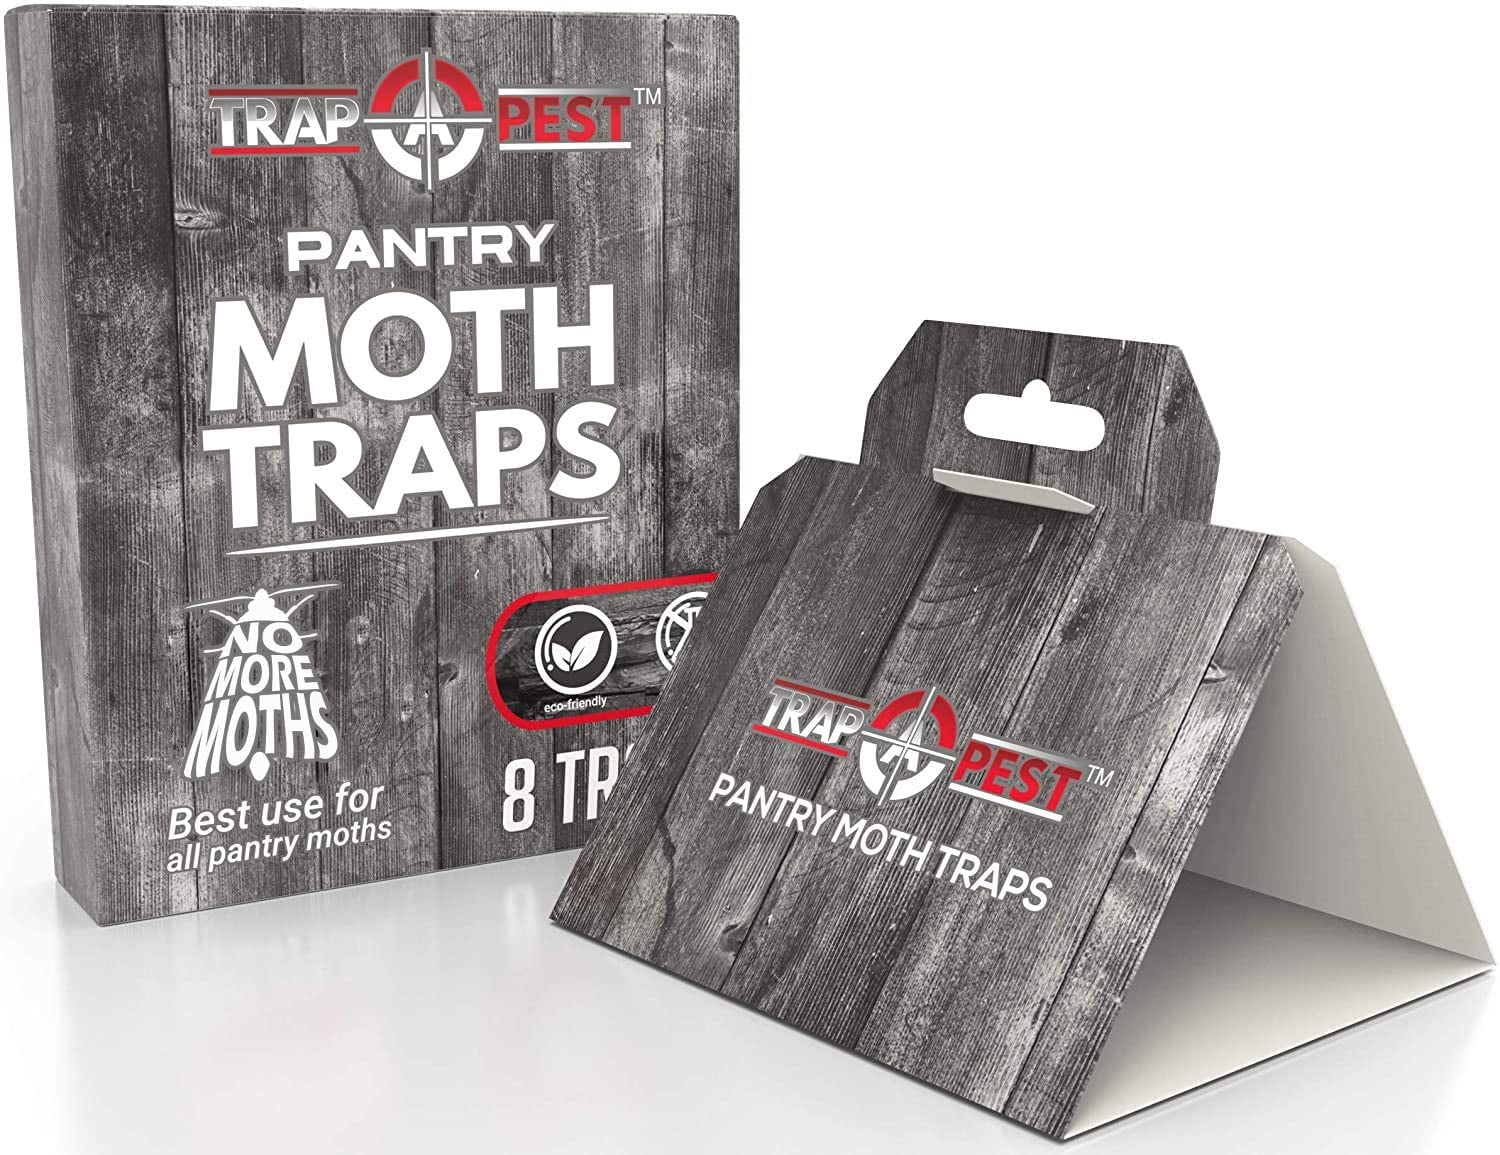 10 Food Moth Traps - Anti Food Moth - Powerful Sticky Trap Product